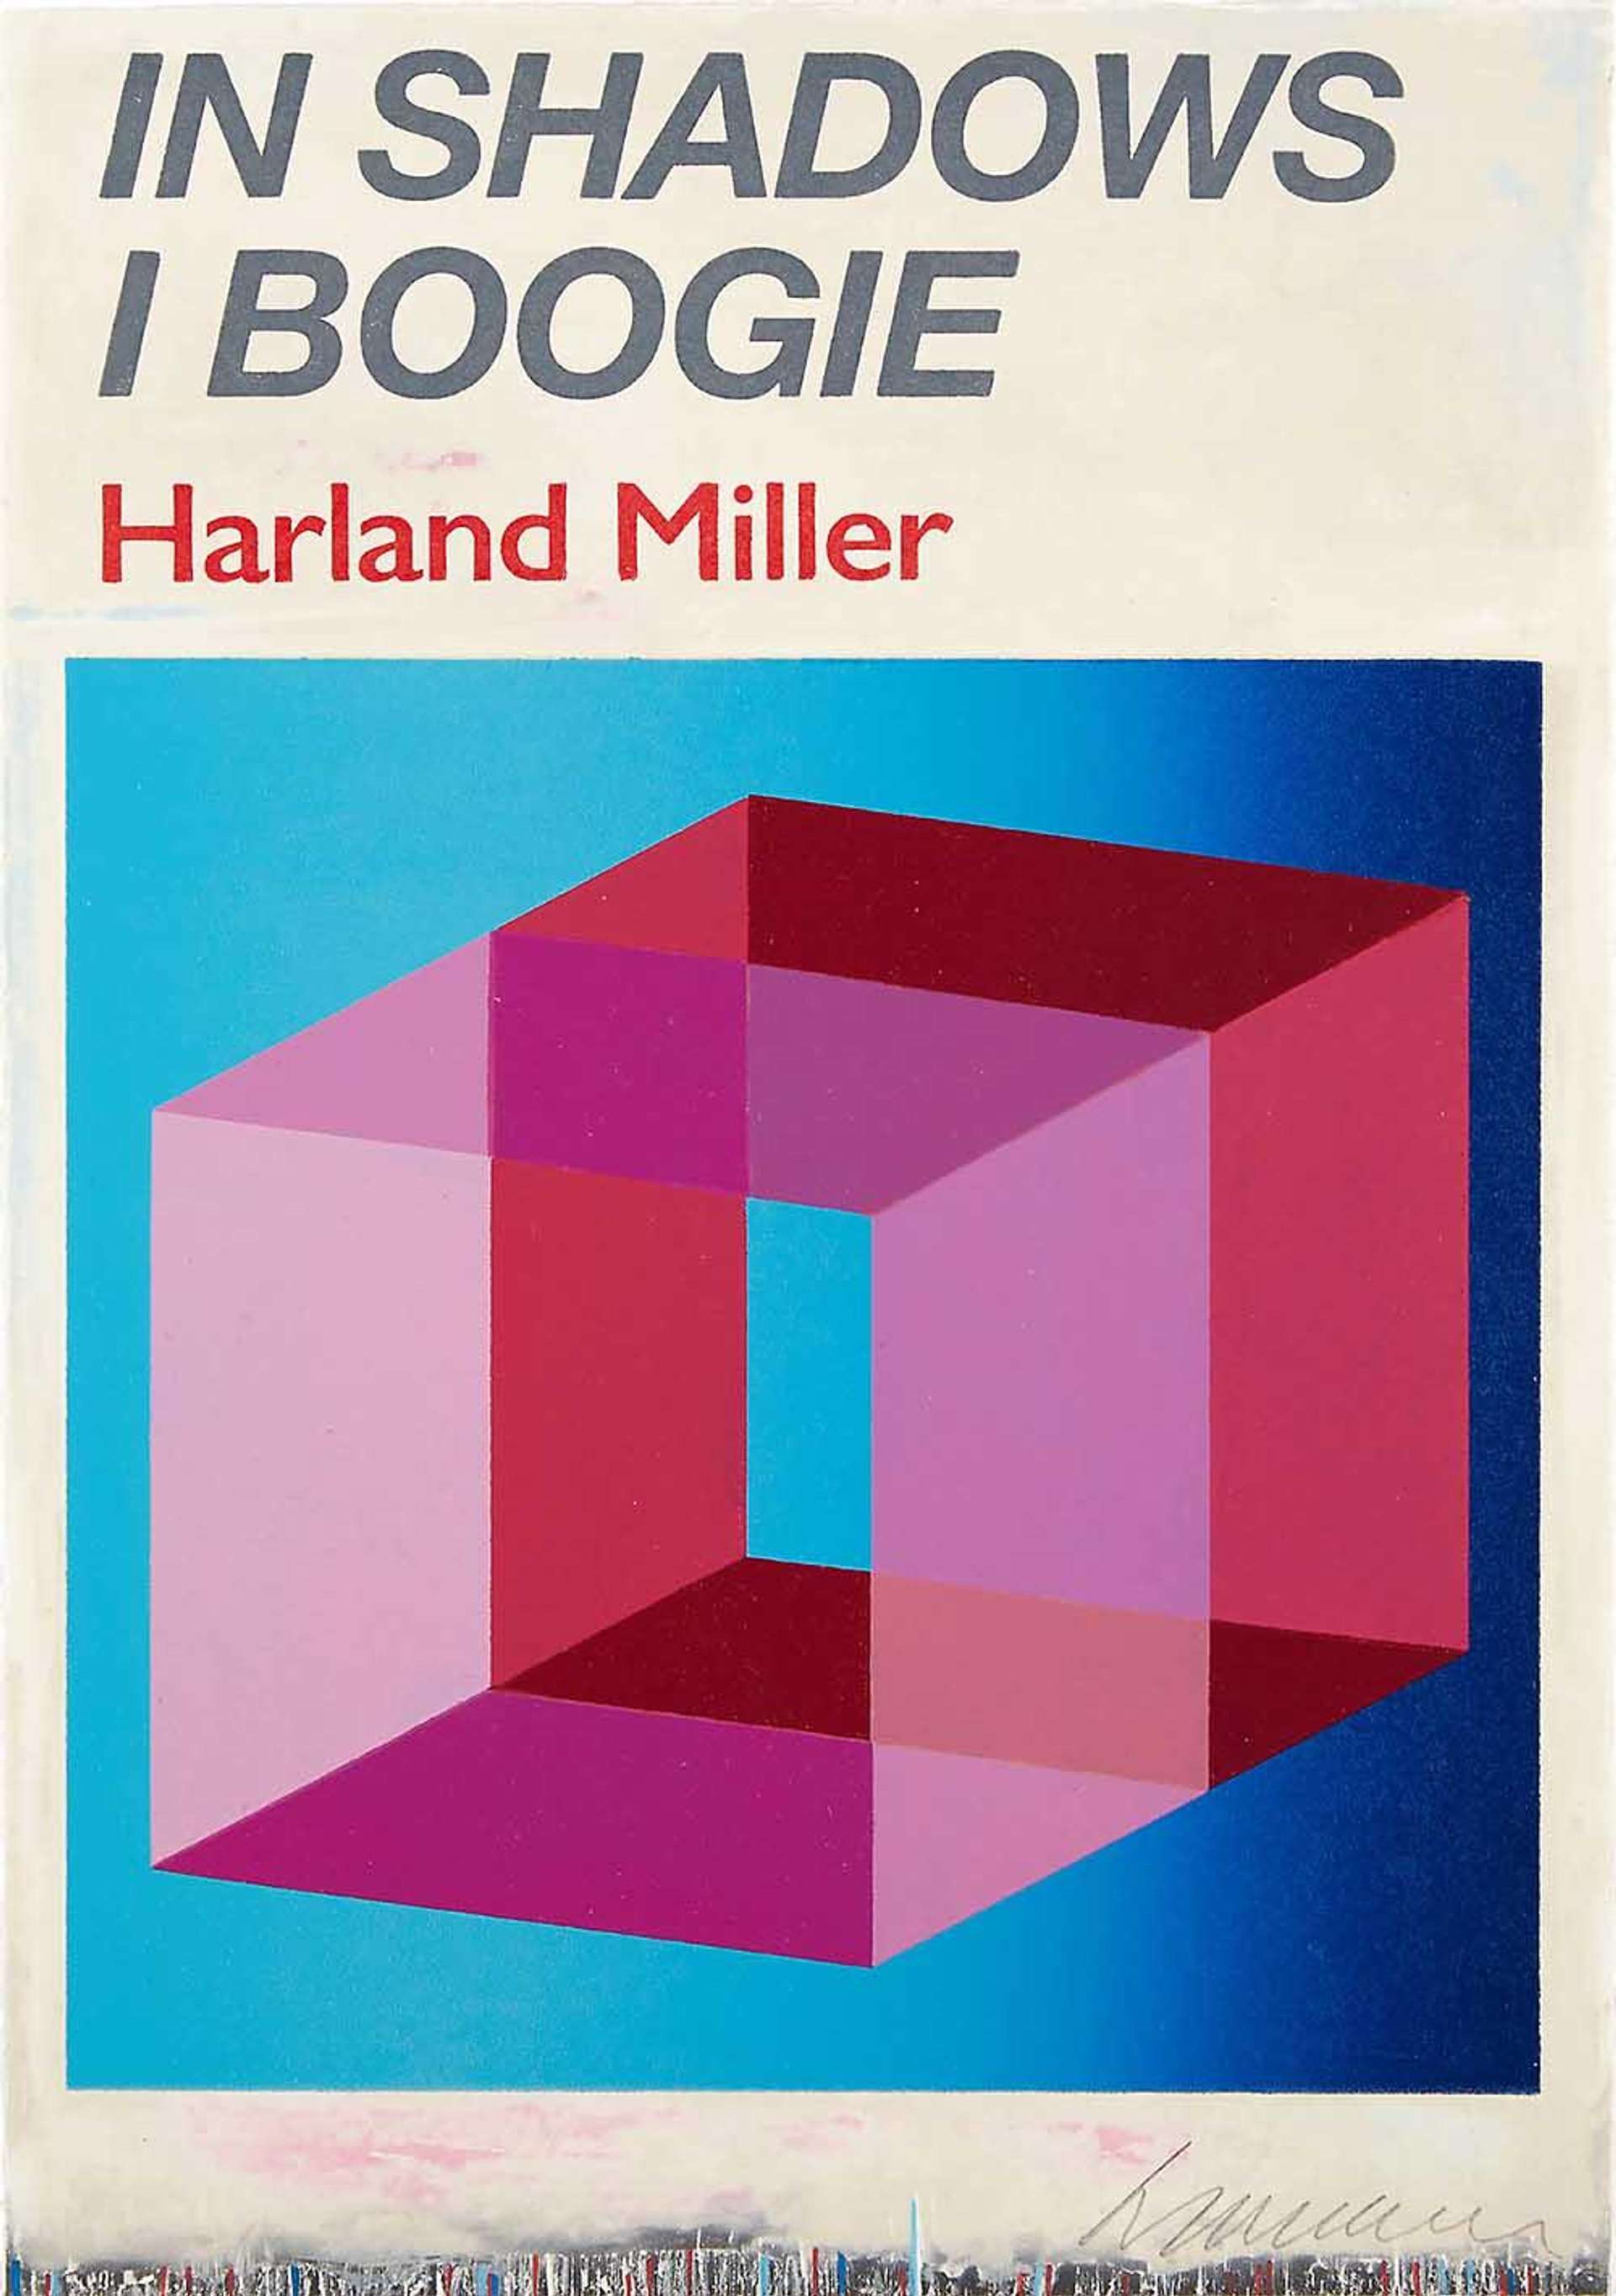 In Shadows I Boogie (blue) by Harland Miller